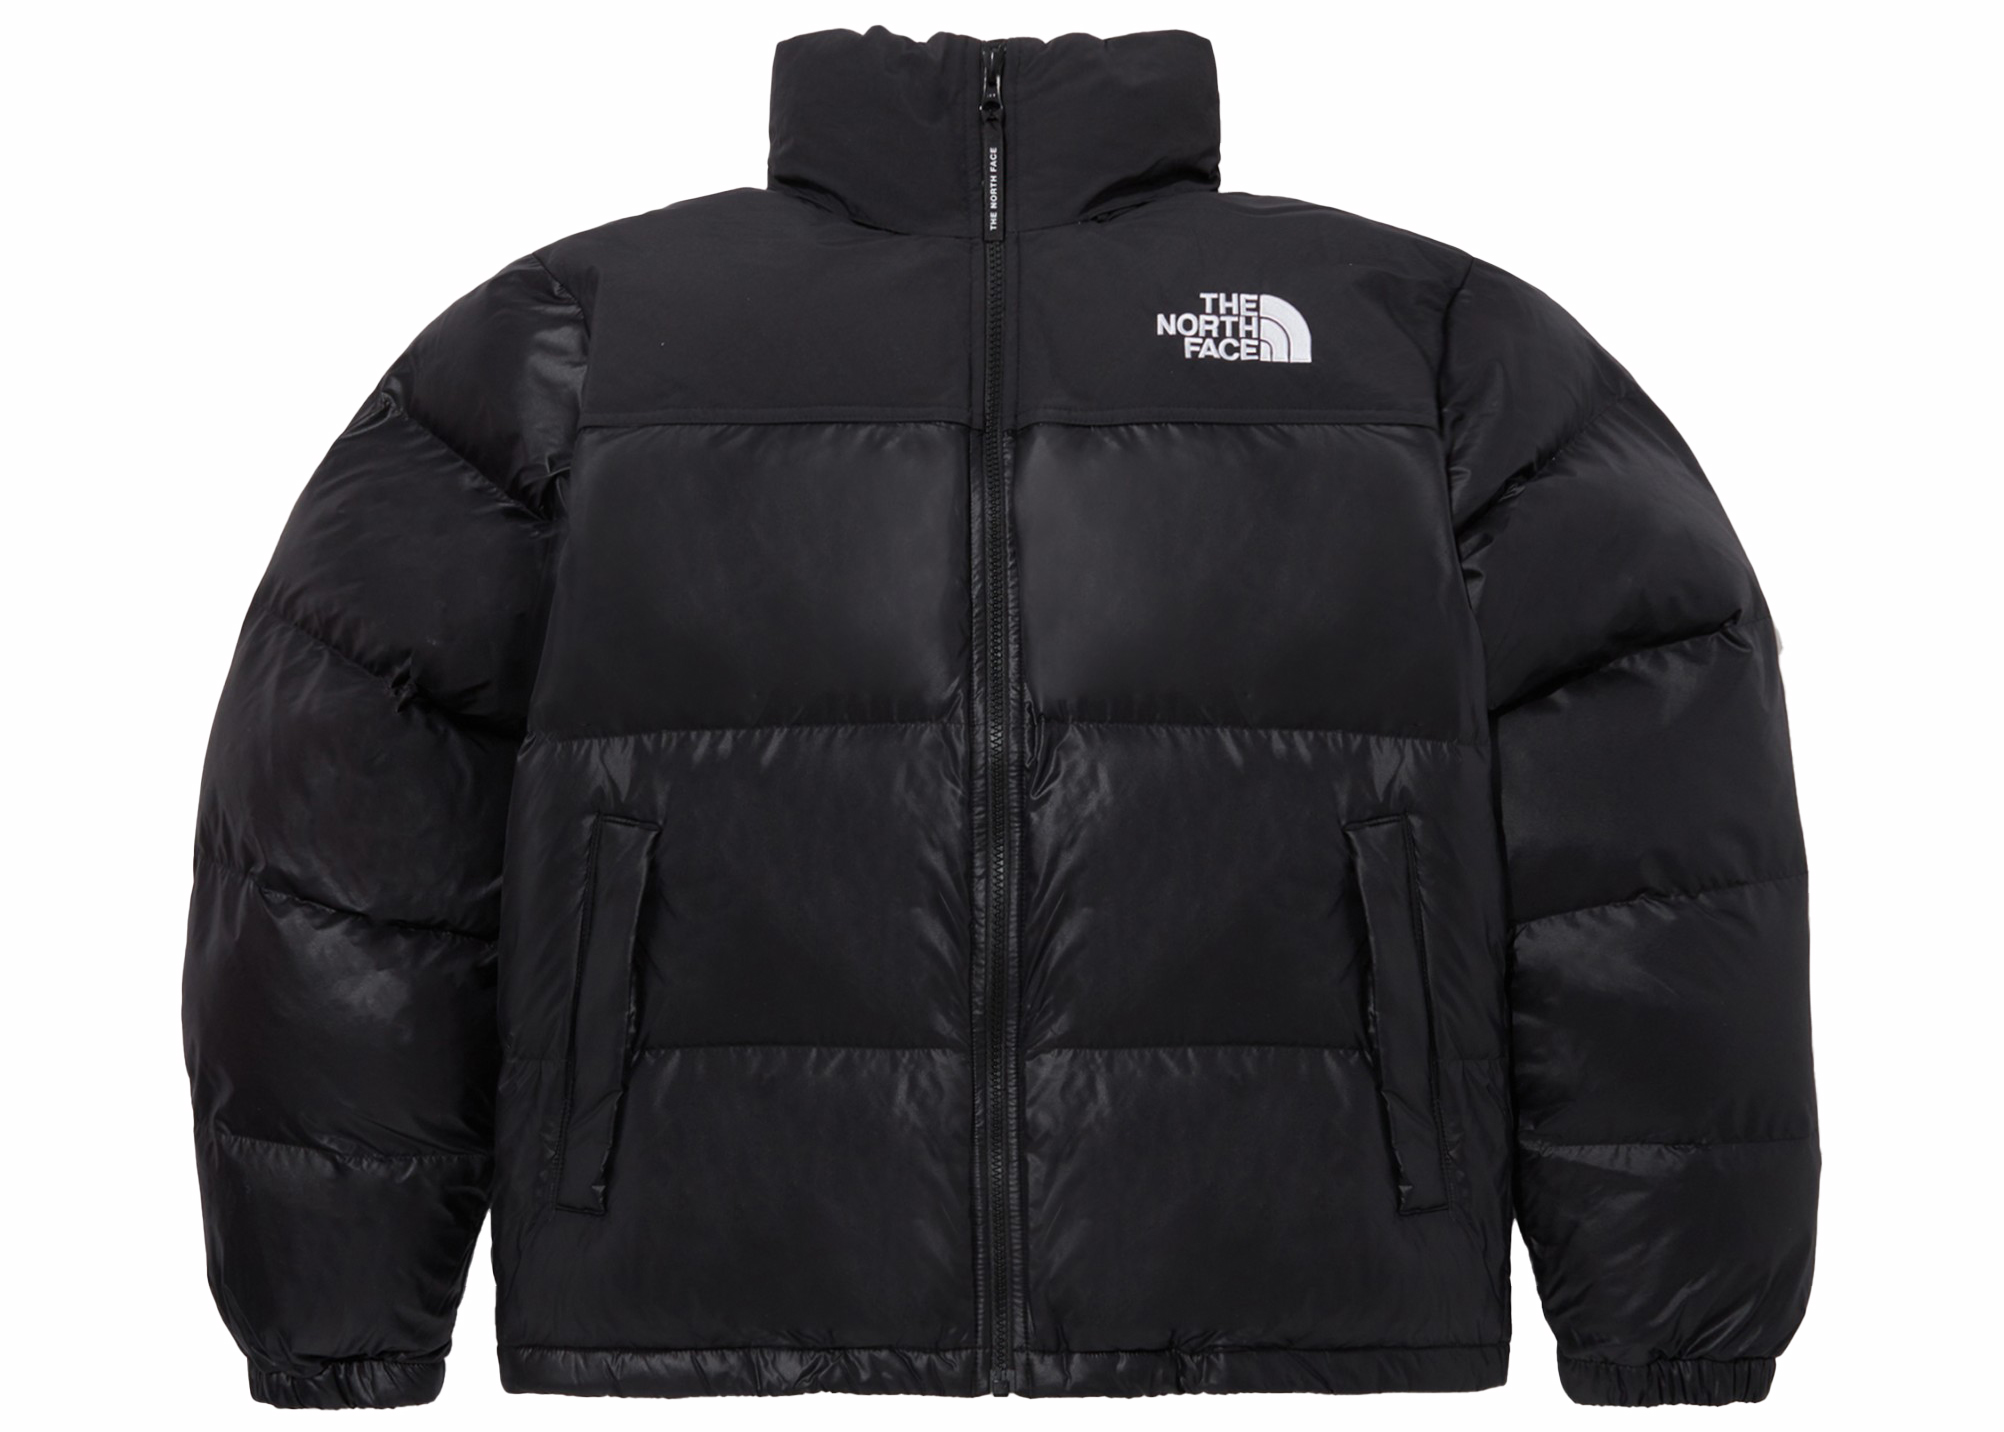 THE NORTH FACE/ザノースフェイス』THE NORTH FACE NUPTSE ON BALL JACKET-